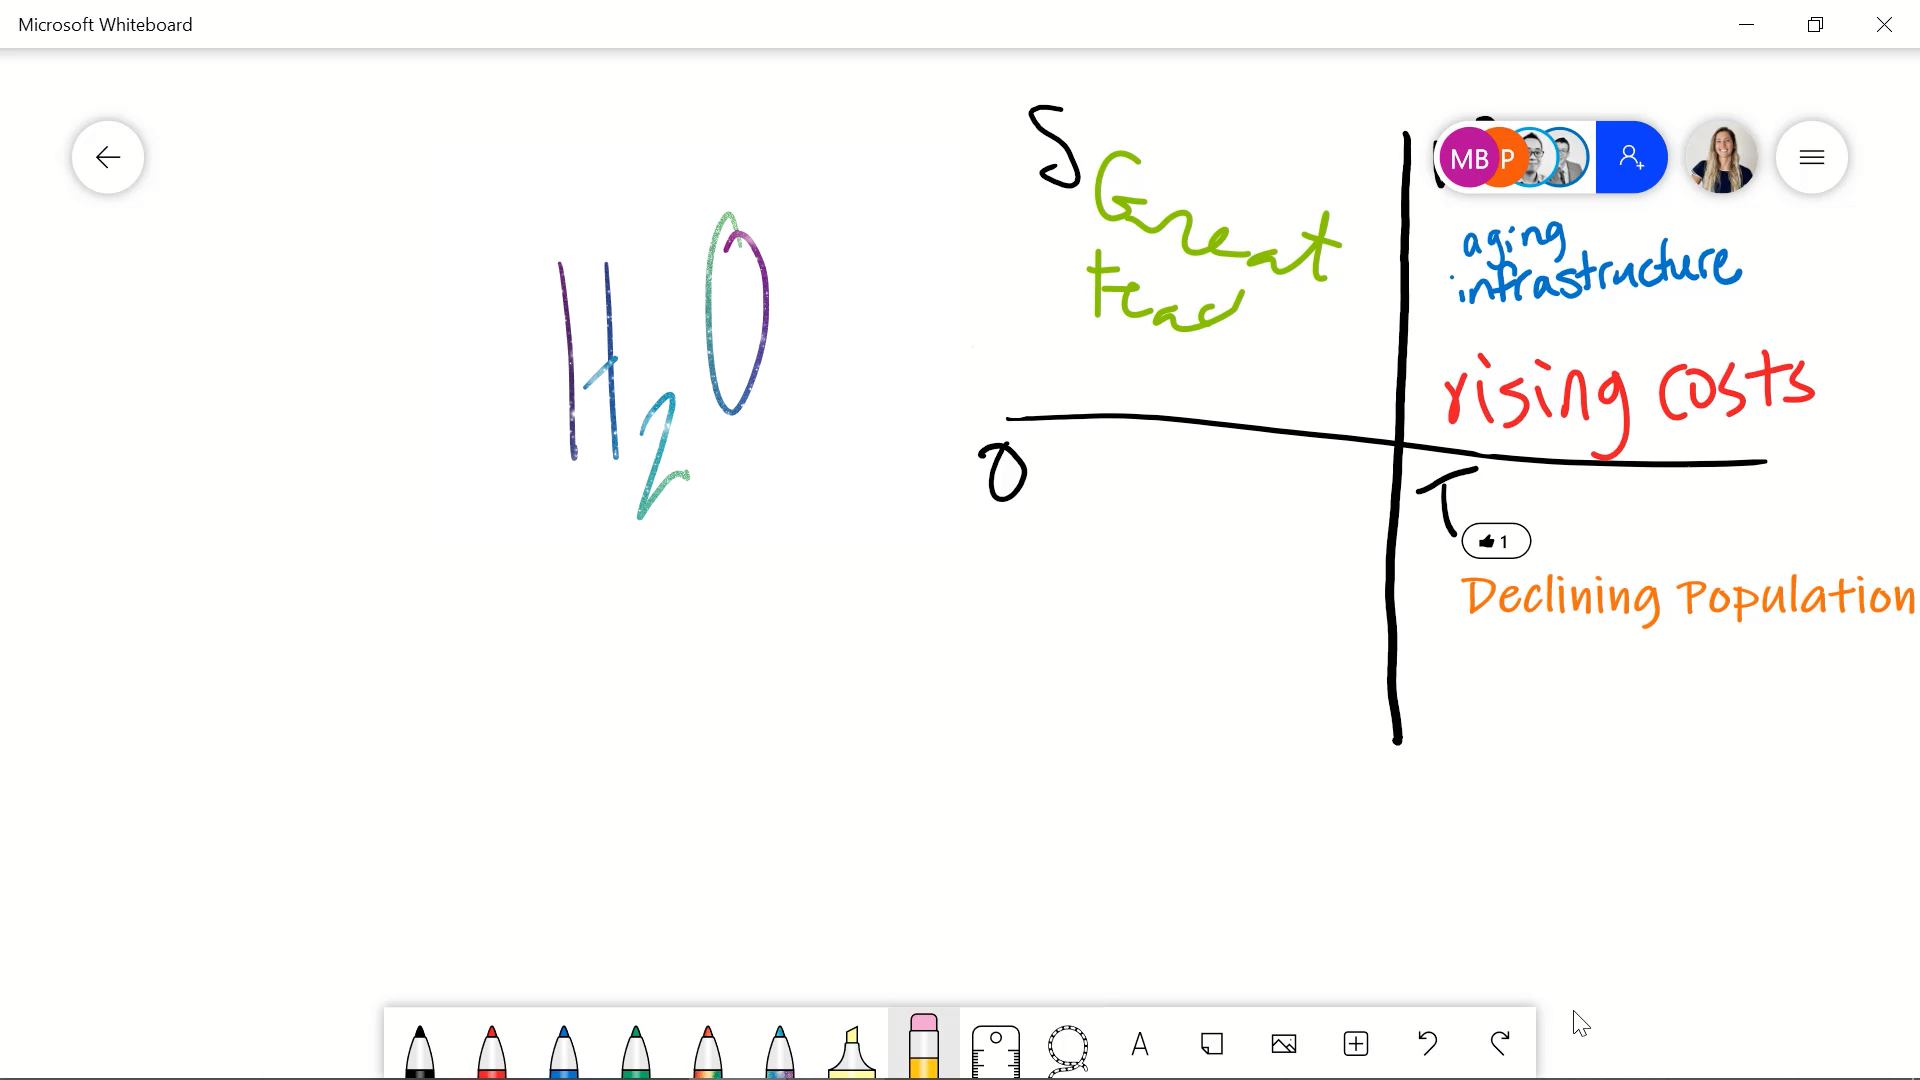 collaborate with Microsoft Whiteboard